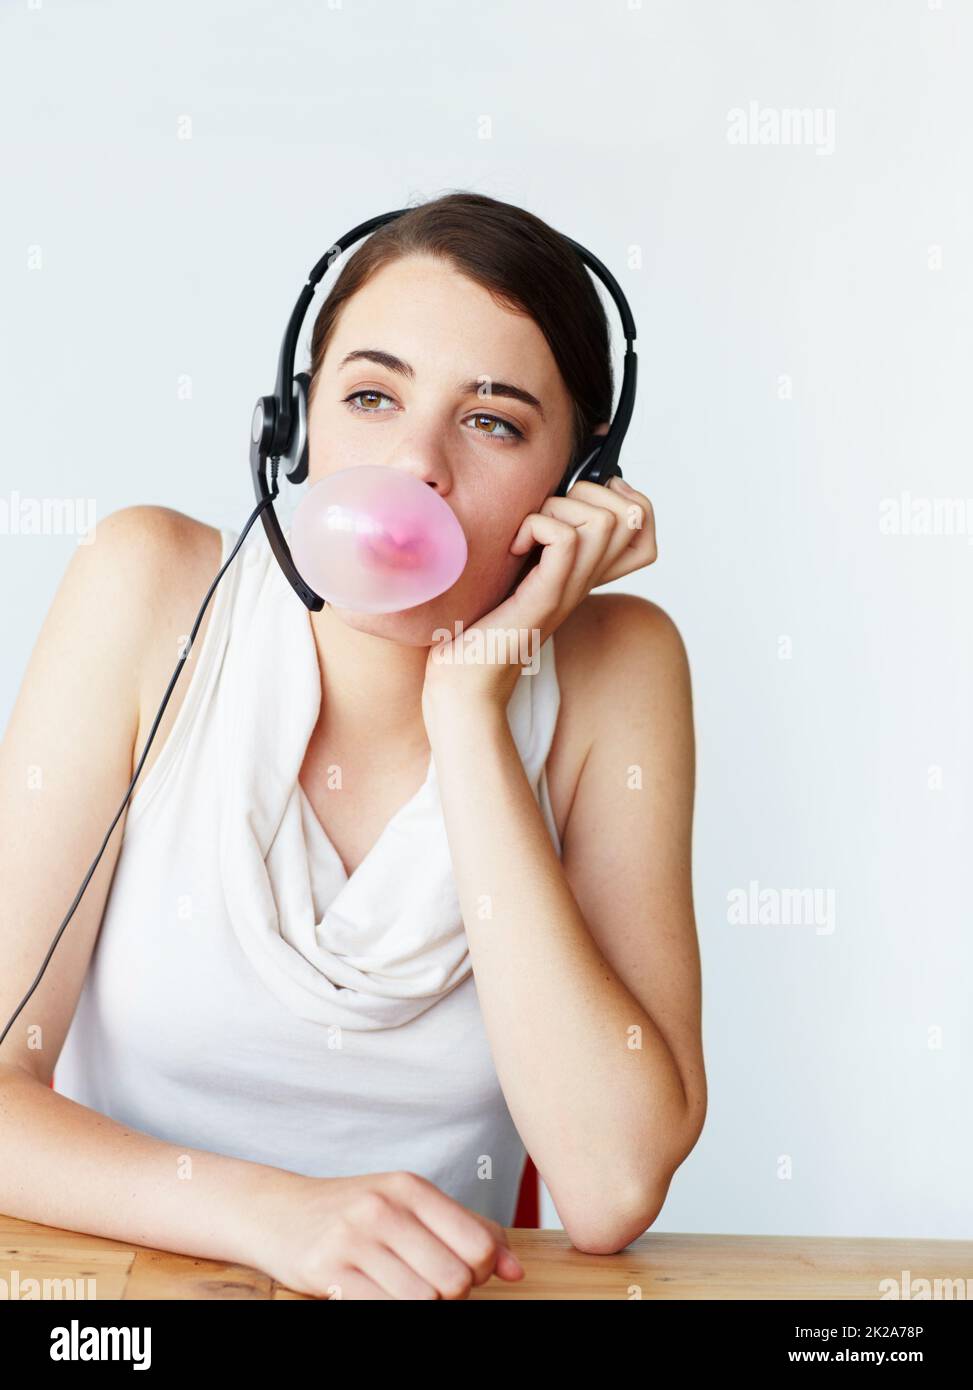 Bubbles of boredom. A beautiful young customer service representative sitting at a table and blowing a bubble while chewing bubblegum. Stock Photo